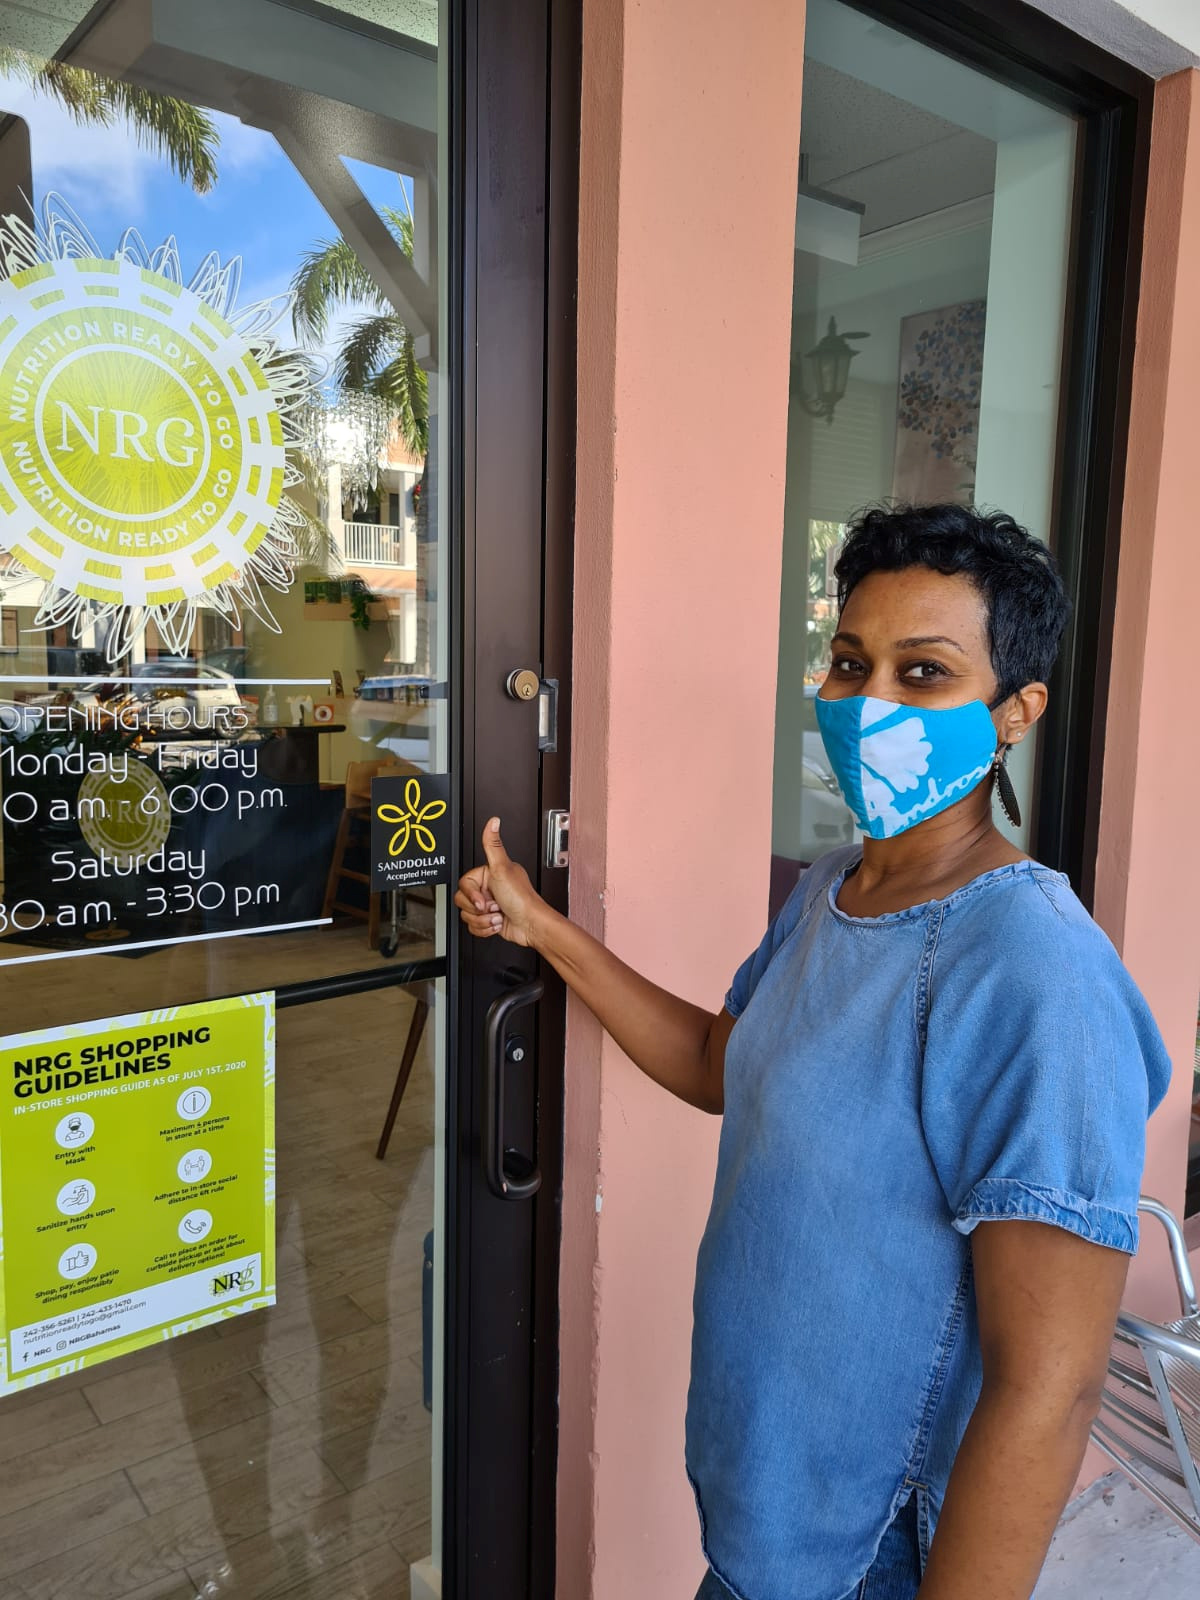 Dawn Sands, owner, poses for a photograph outside NRG cafe in Nassau